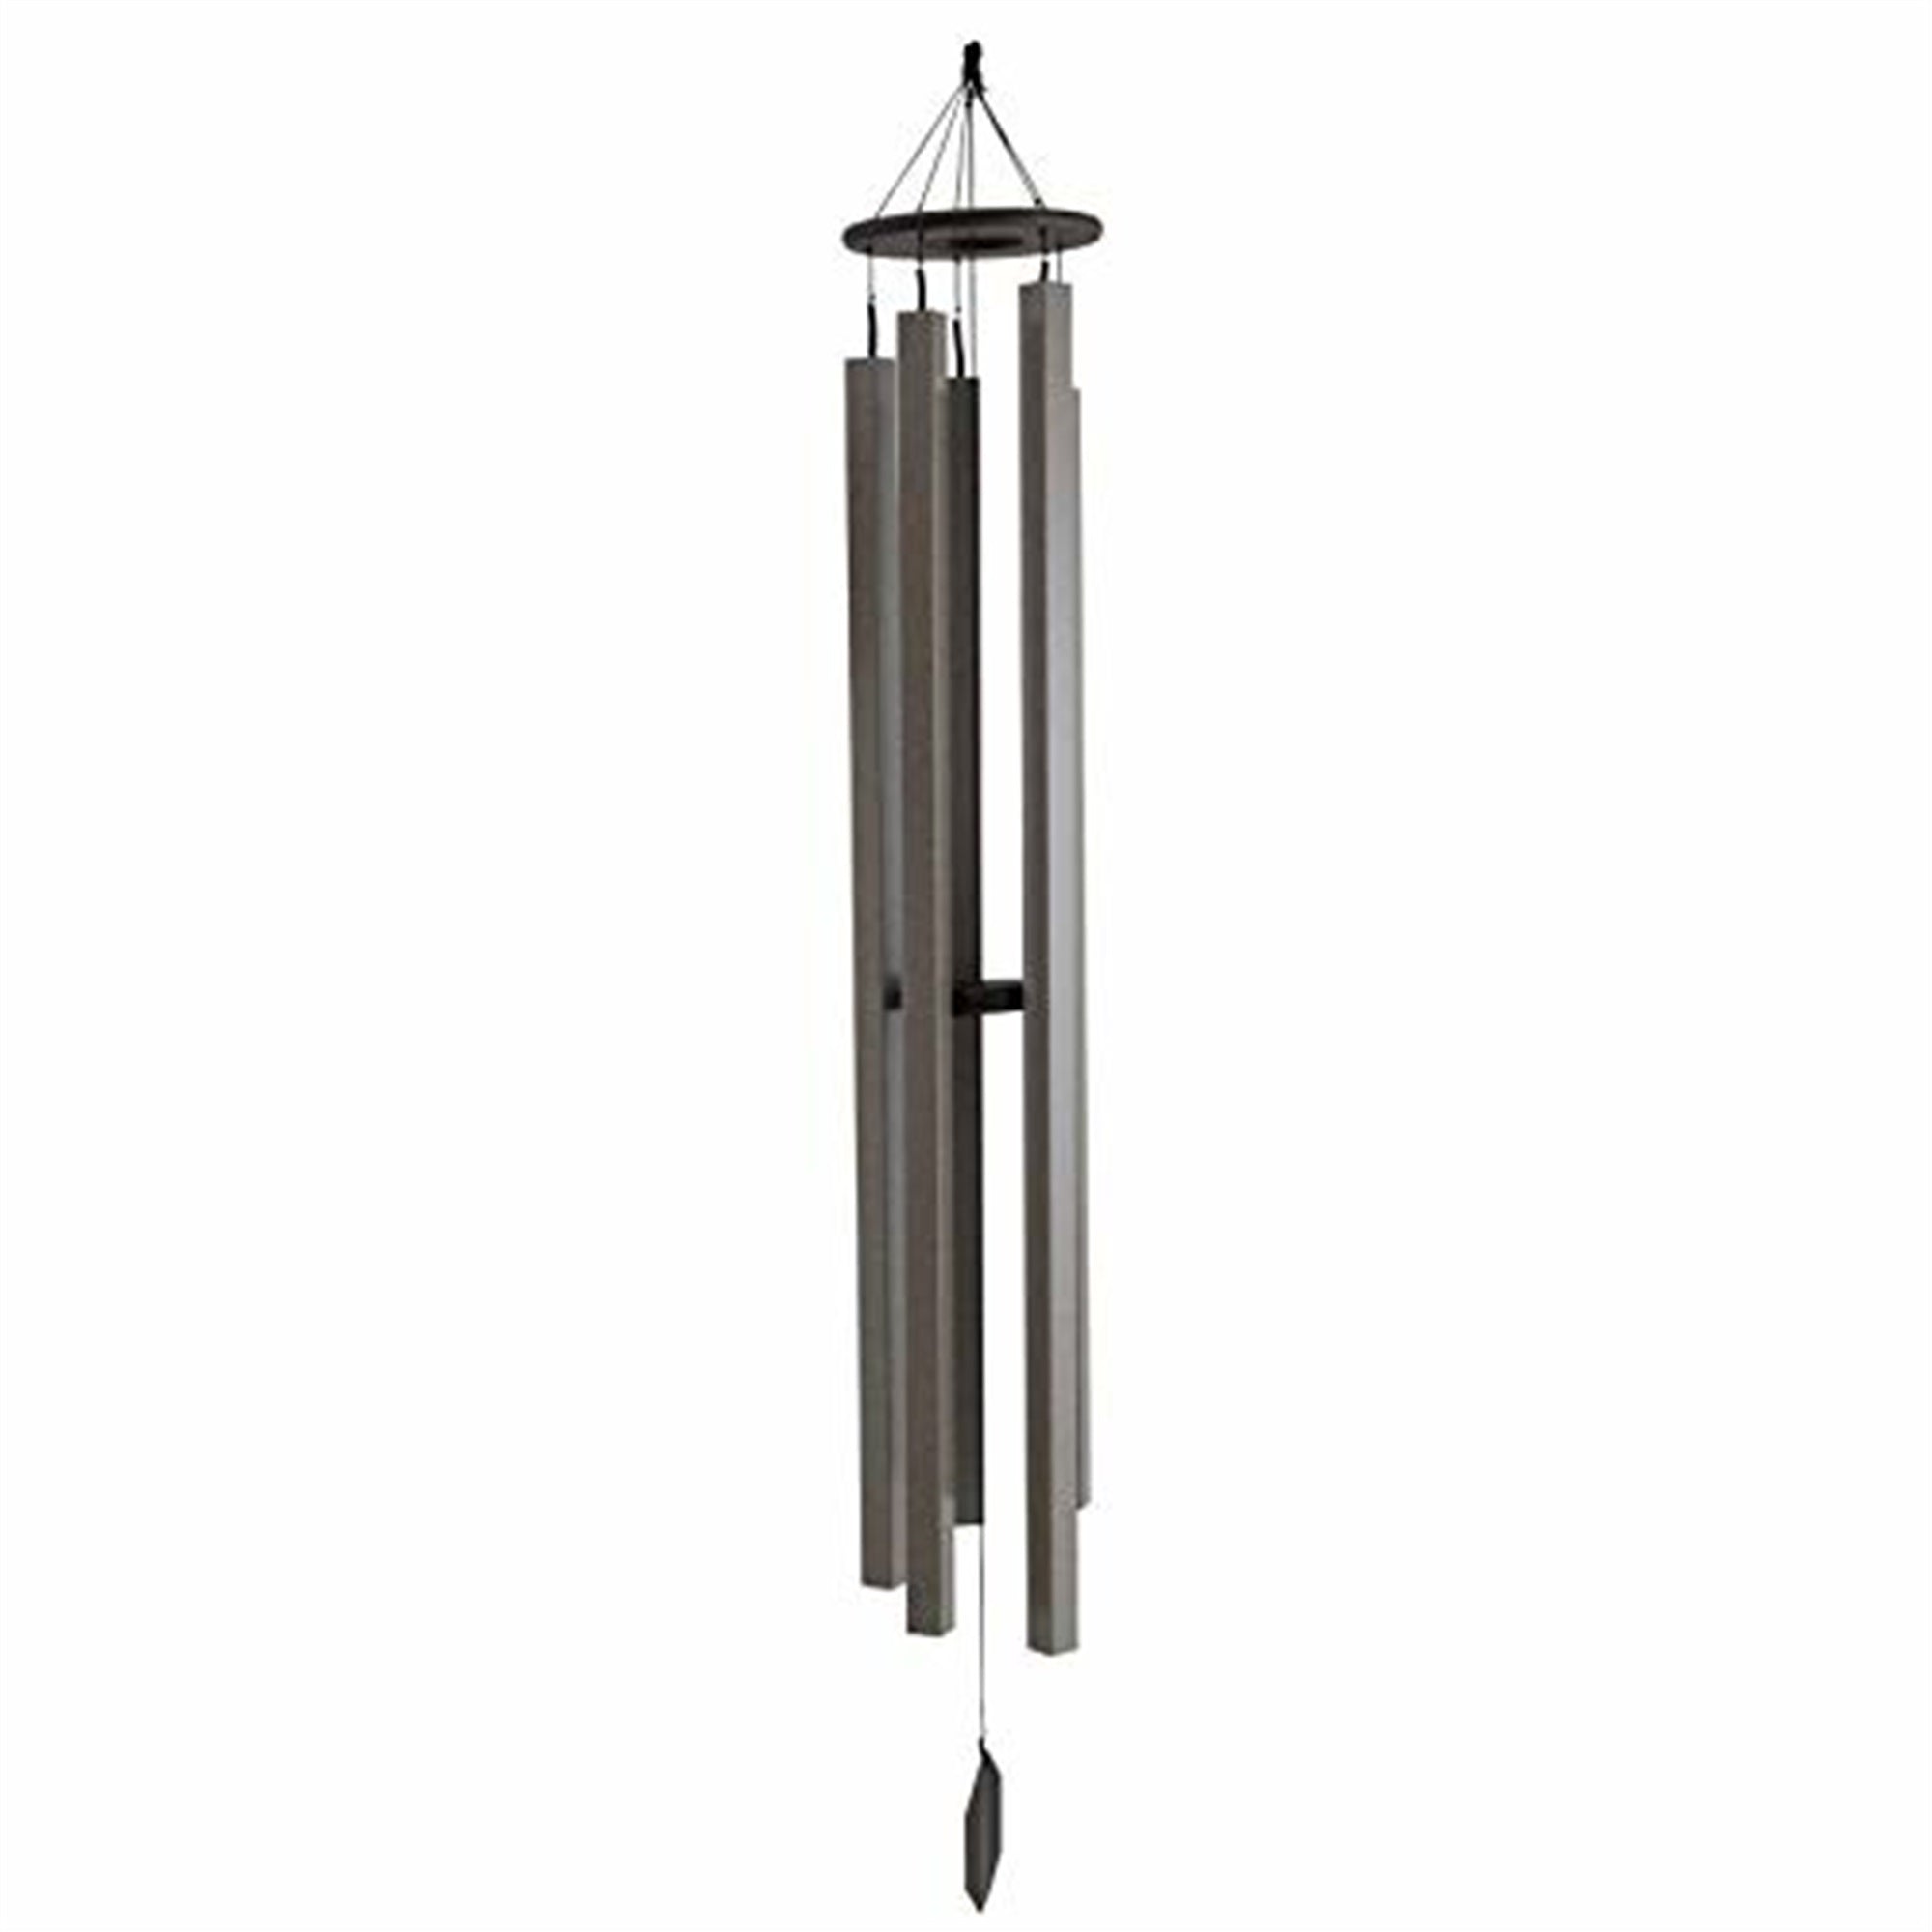 73 Sunsetter Wind Chime - Amish Handcrafted Country Chime